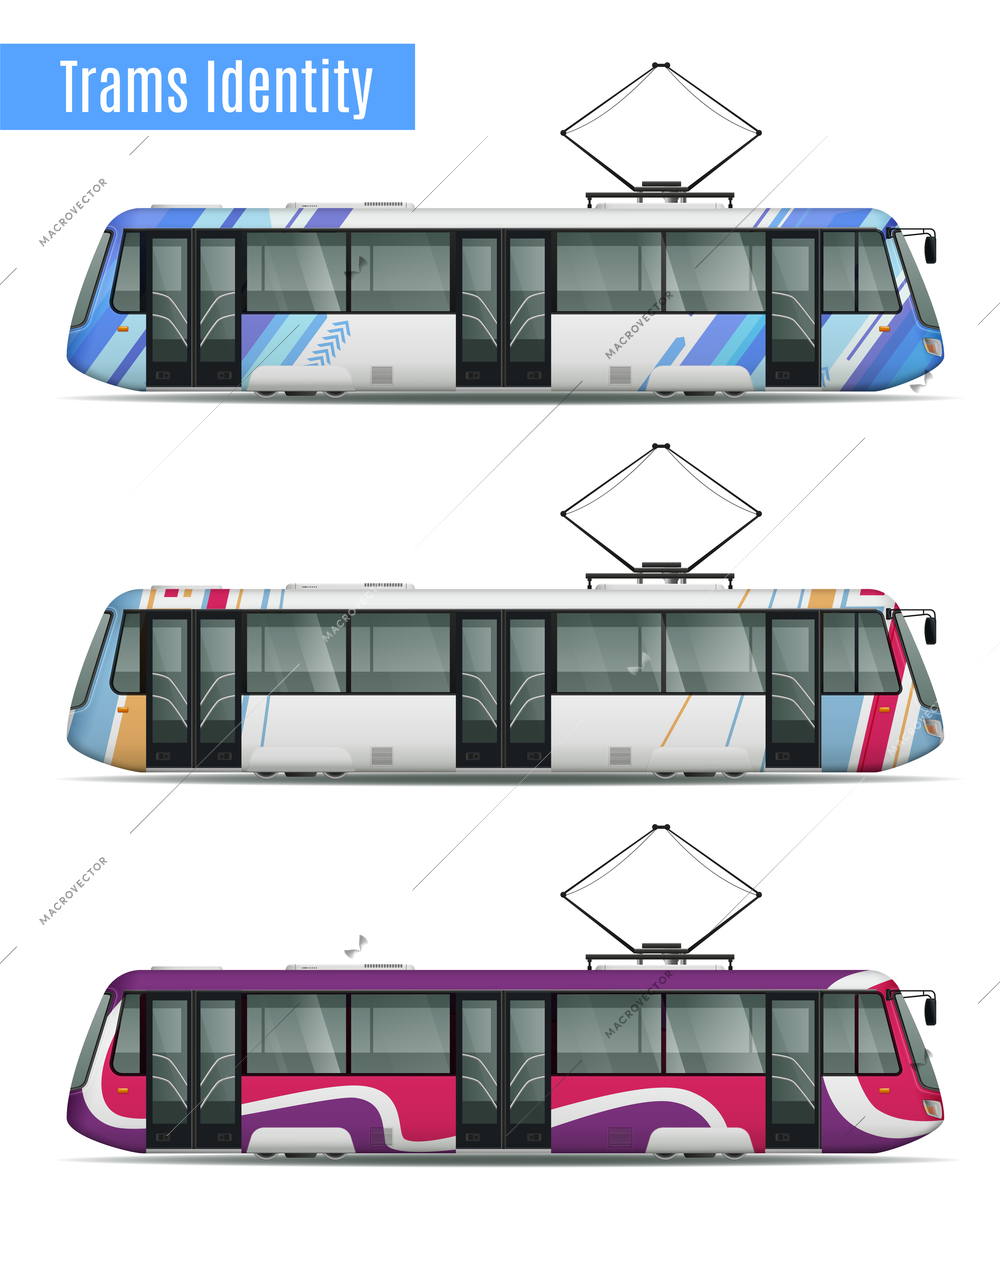 Passenger tram train realistic mockup set of three similar tram cars with different livery coloring patterns vector illustration